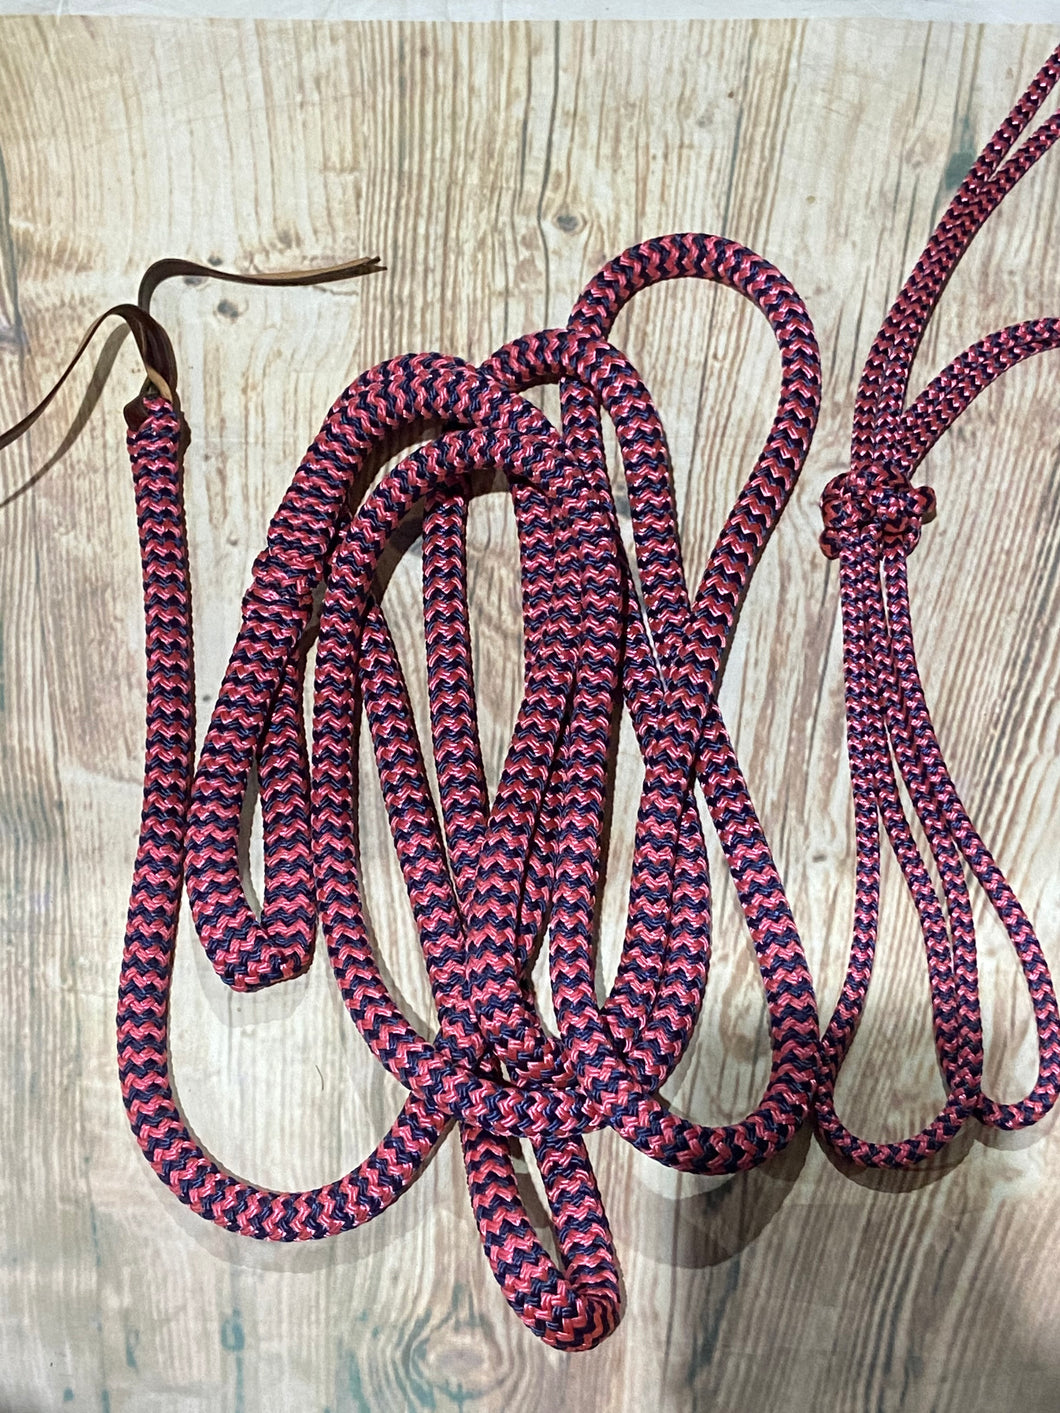 12' Lead and halter